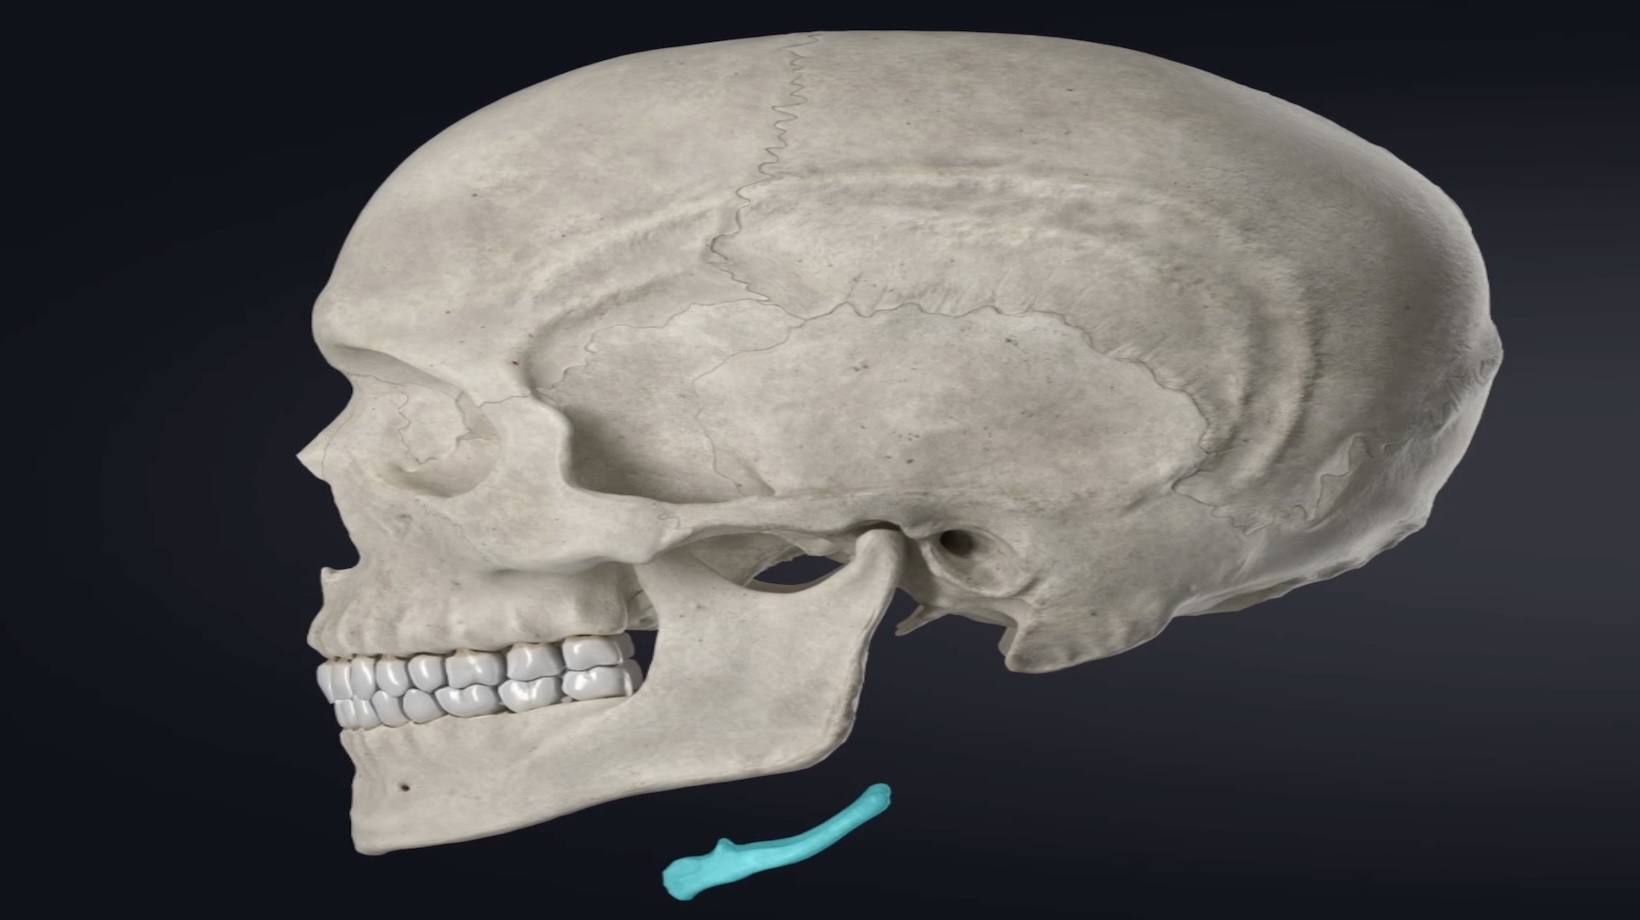 An Injury to the Cranium Would Directly Affect: Understanding the Impact of Cranial Injuries